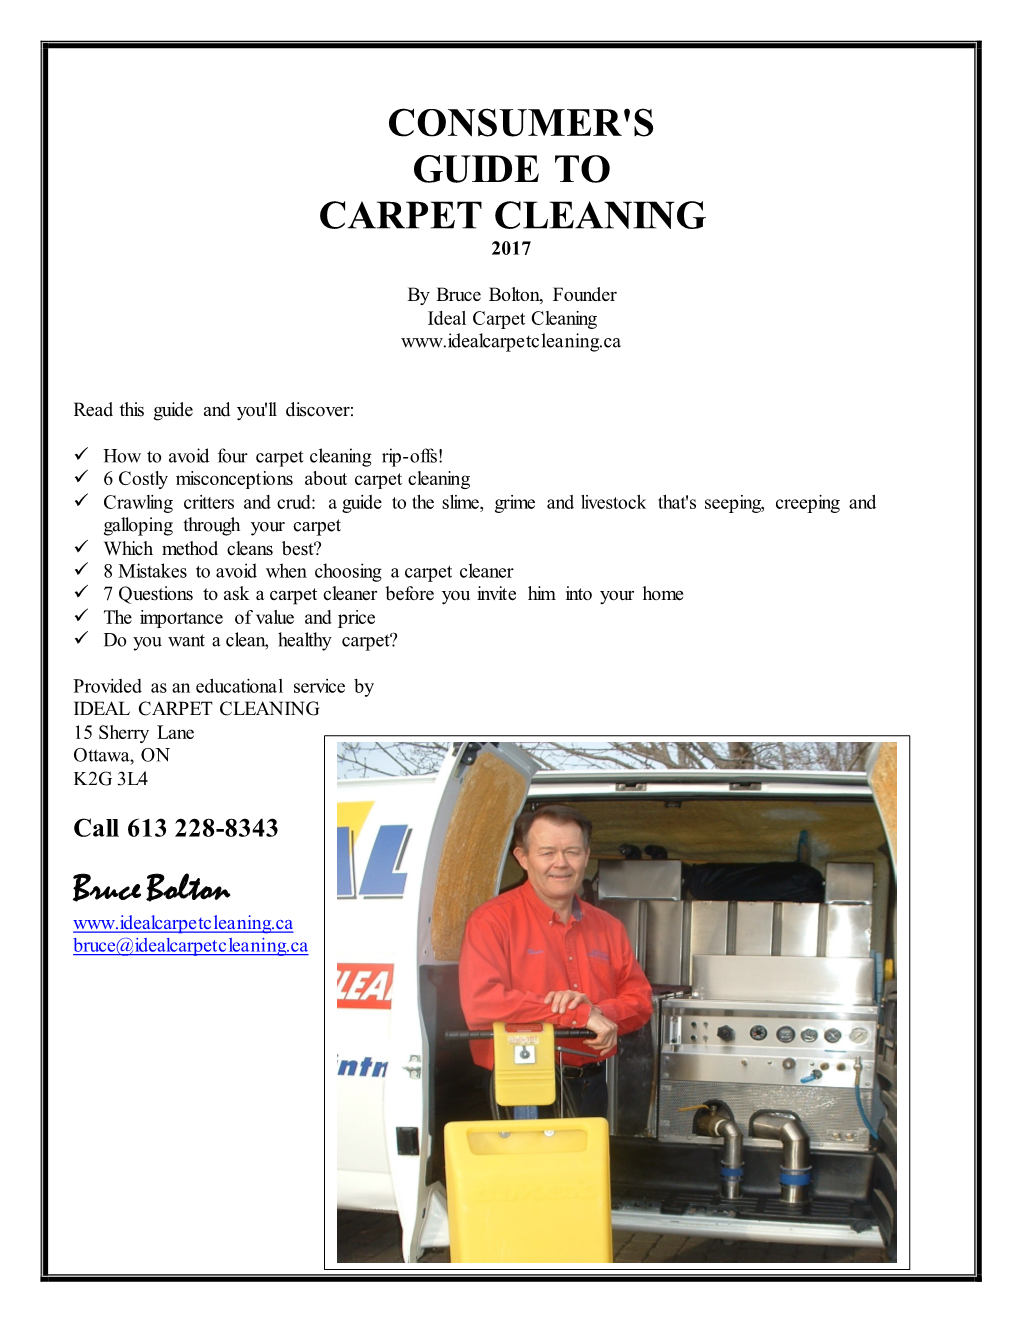 Consumer's Guide to Carpet Cleaning 2017